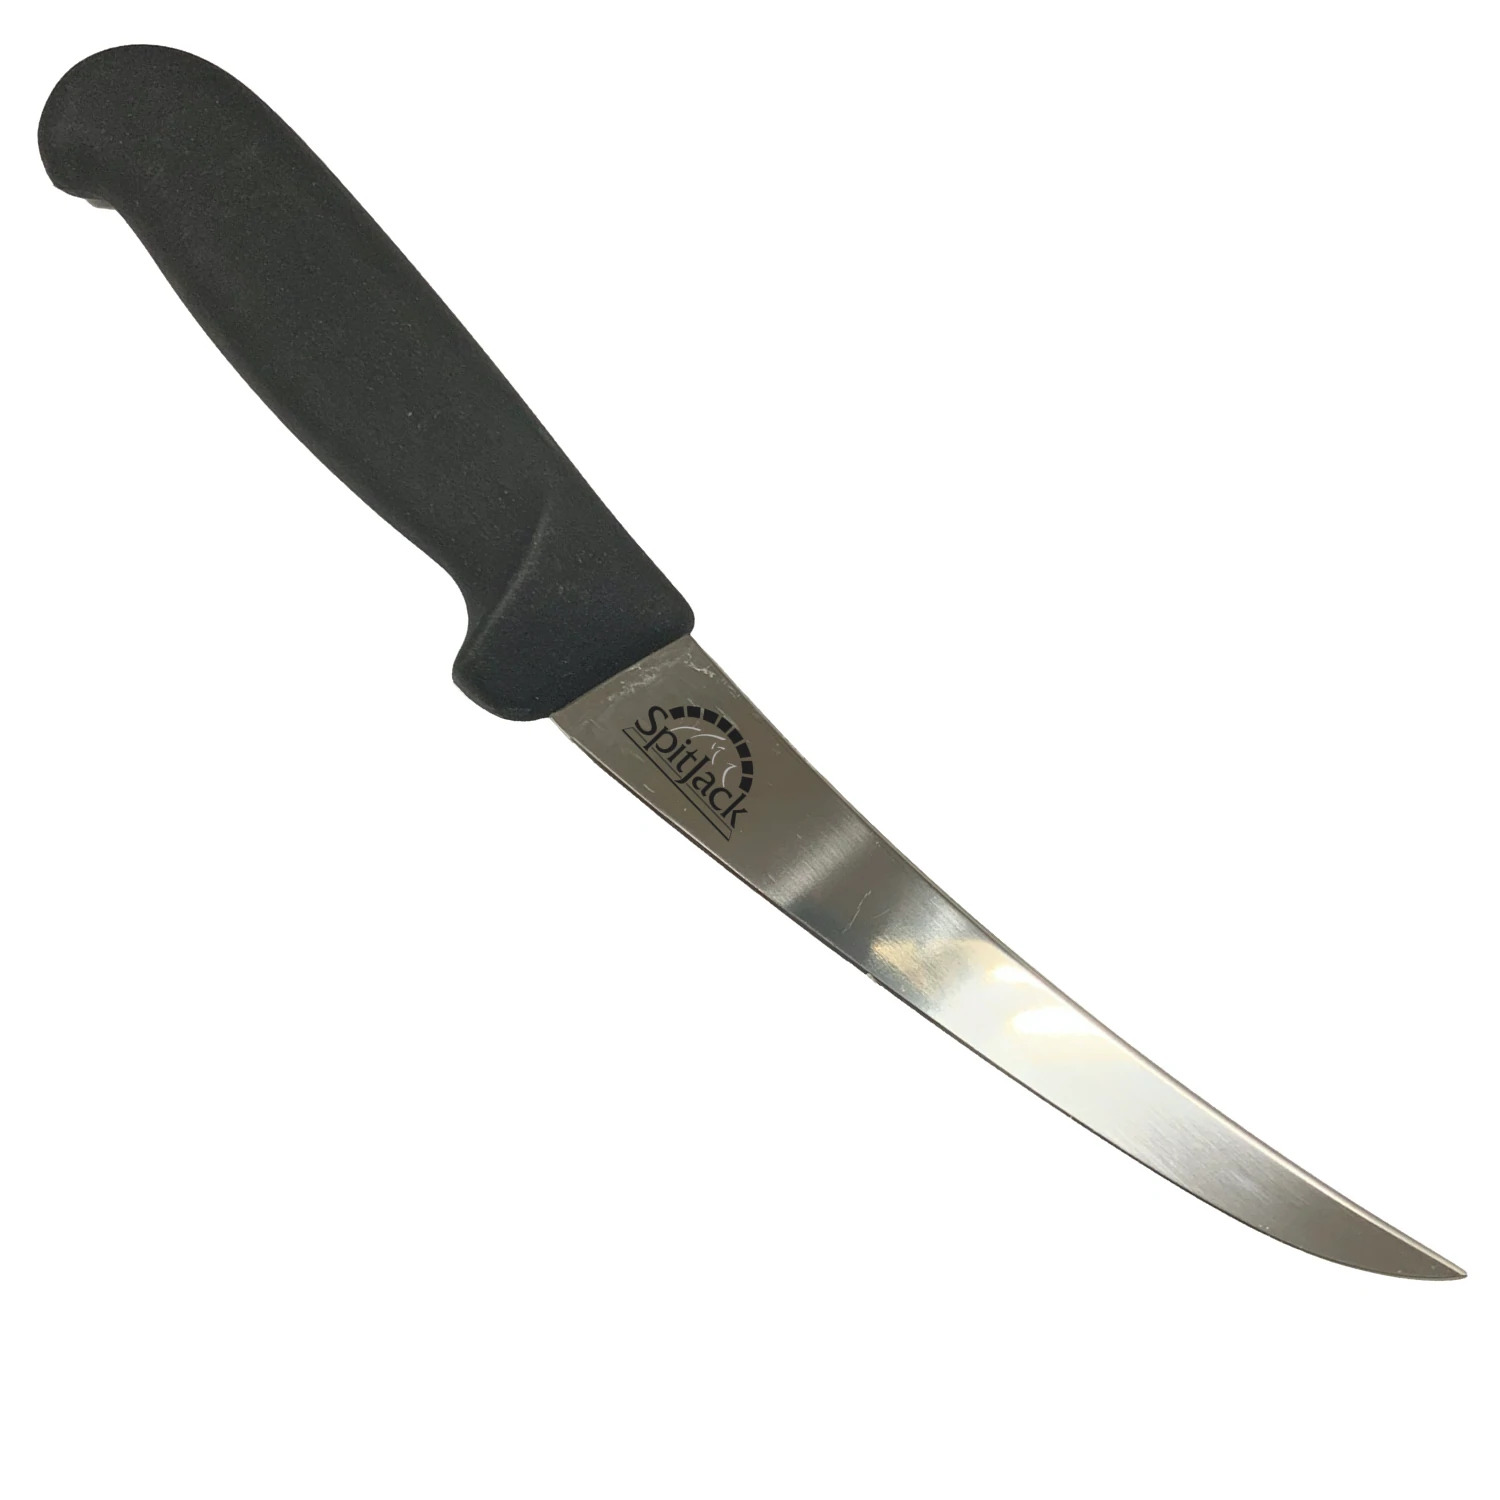 https://mdbbqservices.com/wp-content/uploads/2022/05/SpitJack_6_Inch_Meat_Trimming_and_Boning_Knife_01.jpg